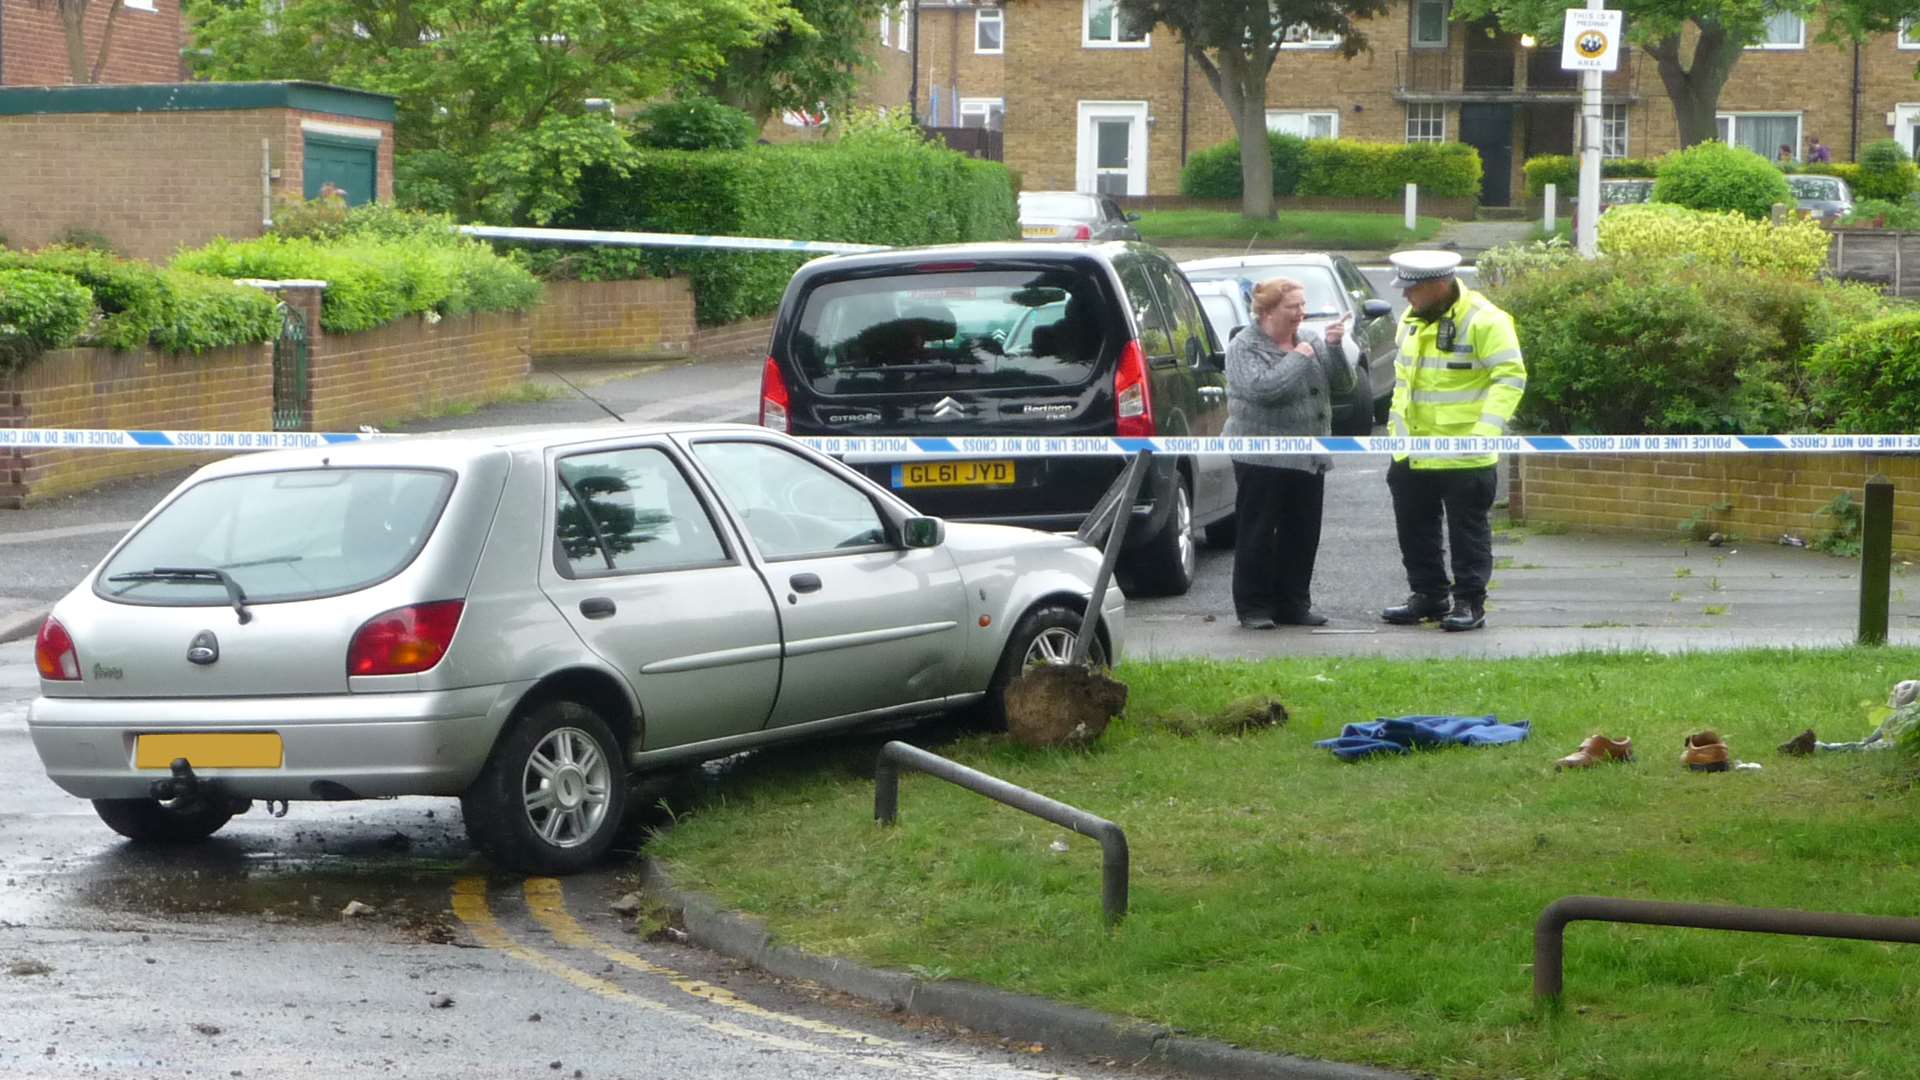 Police officers talk to a witness in Twydall where a pensioner who died crashed his car